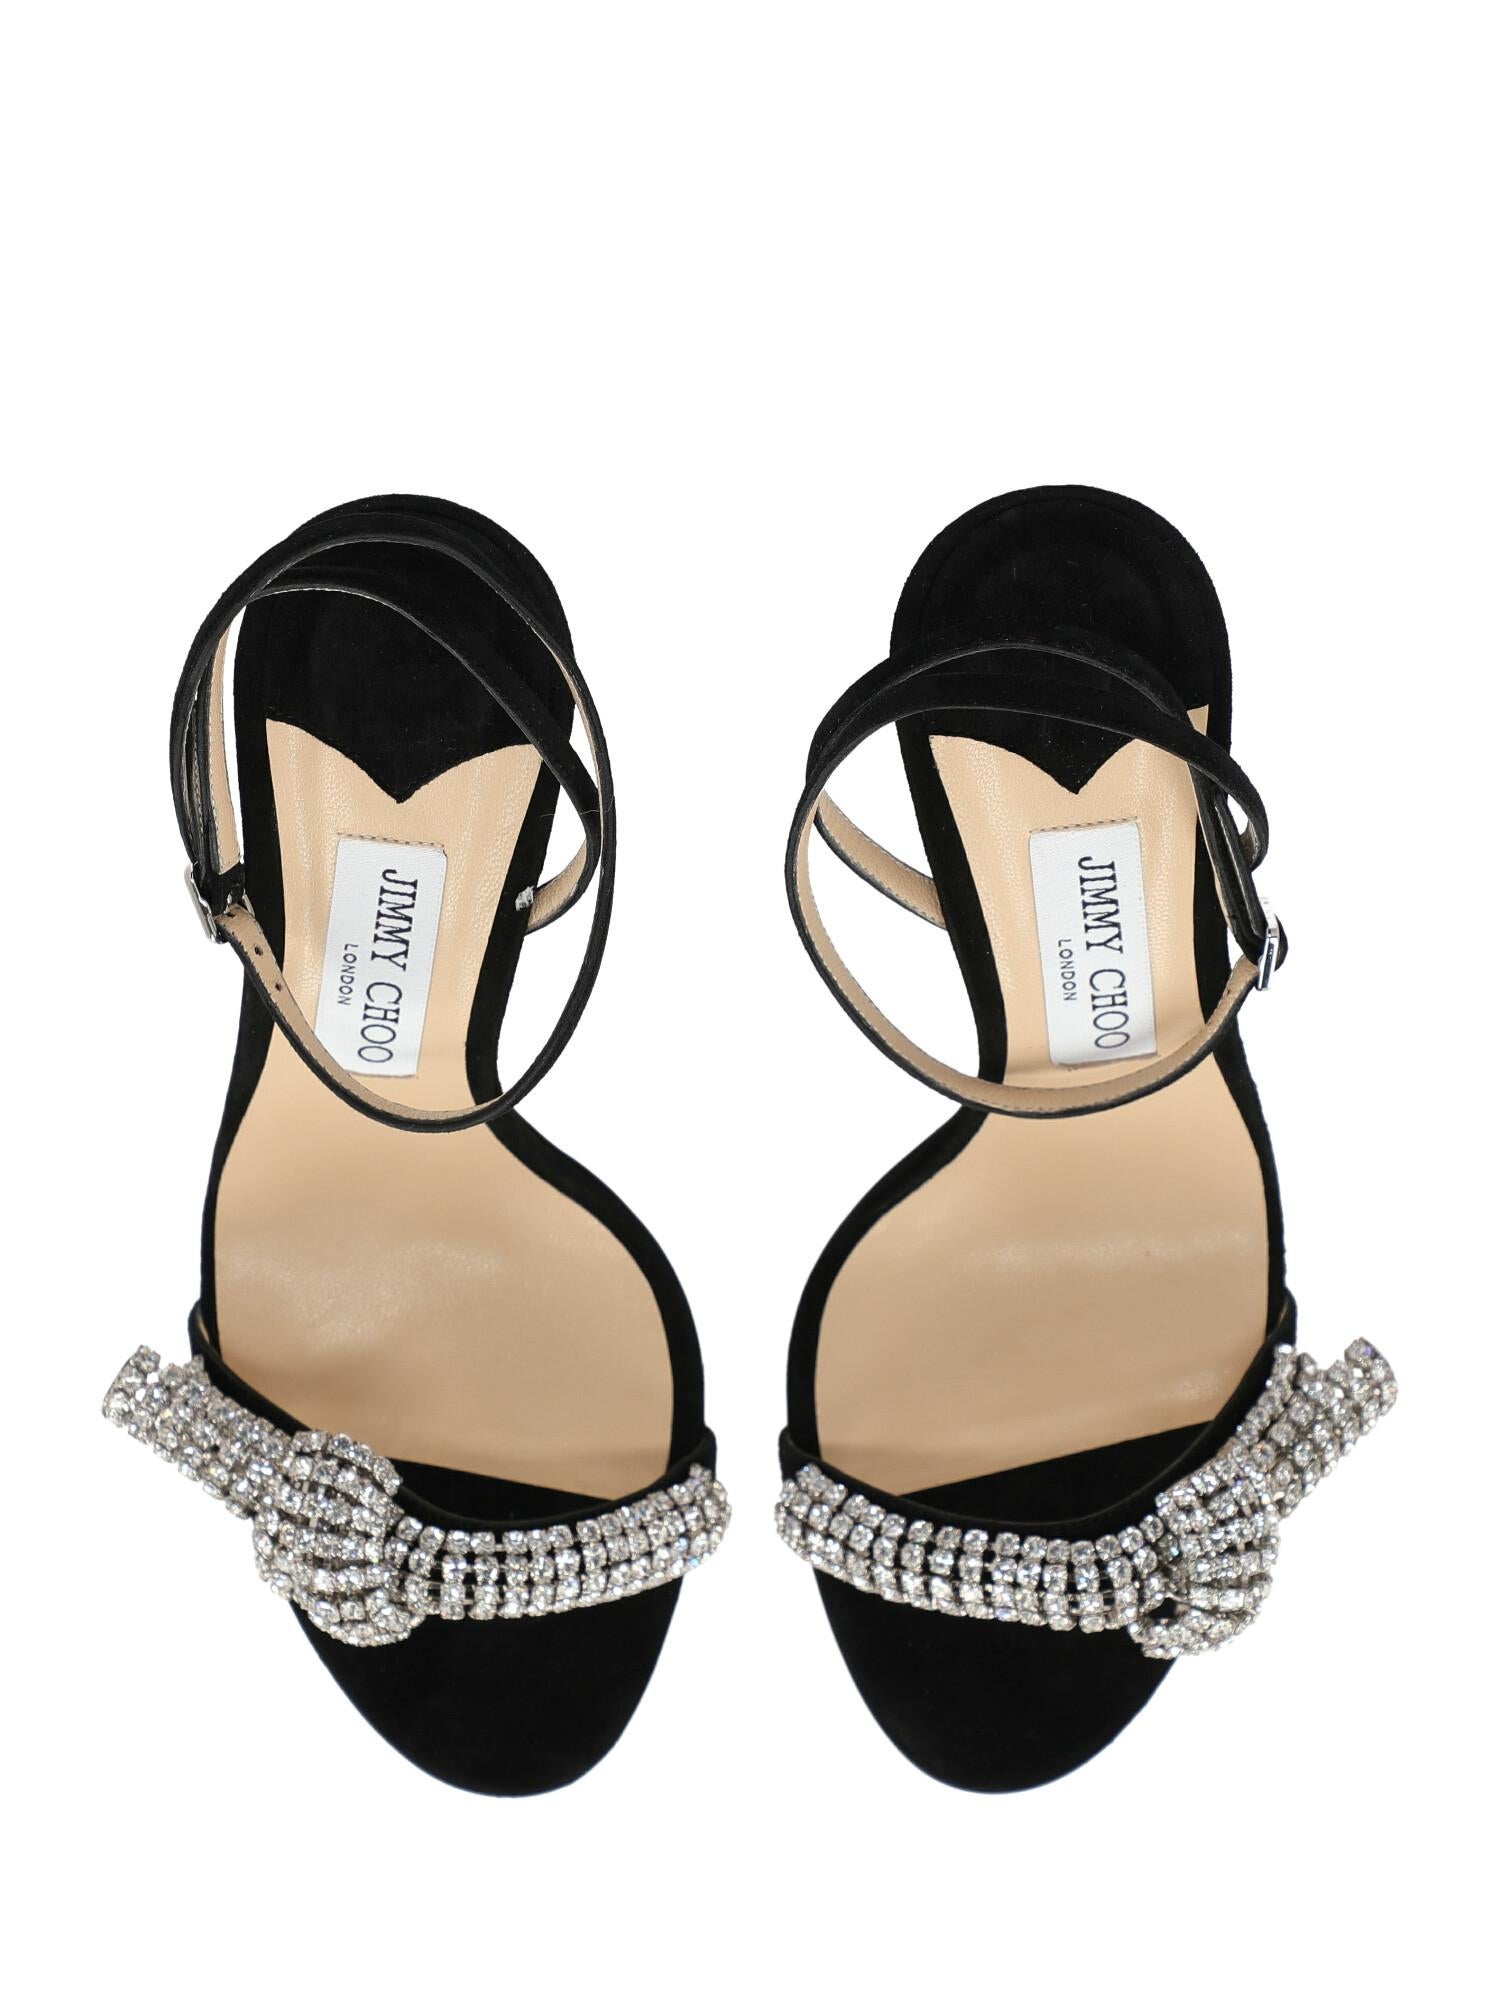 Jimmy Choo Woman Sandals Black Leather IT 40 For Sale 2